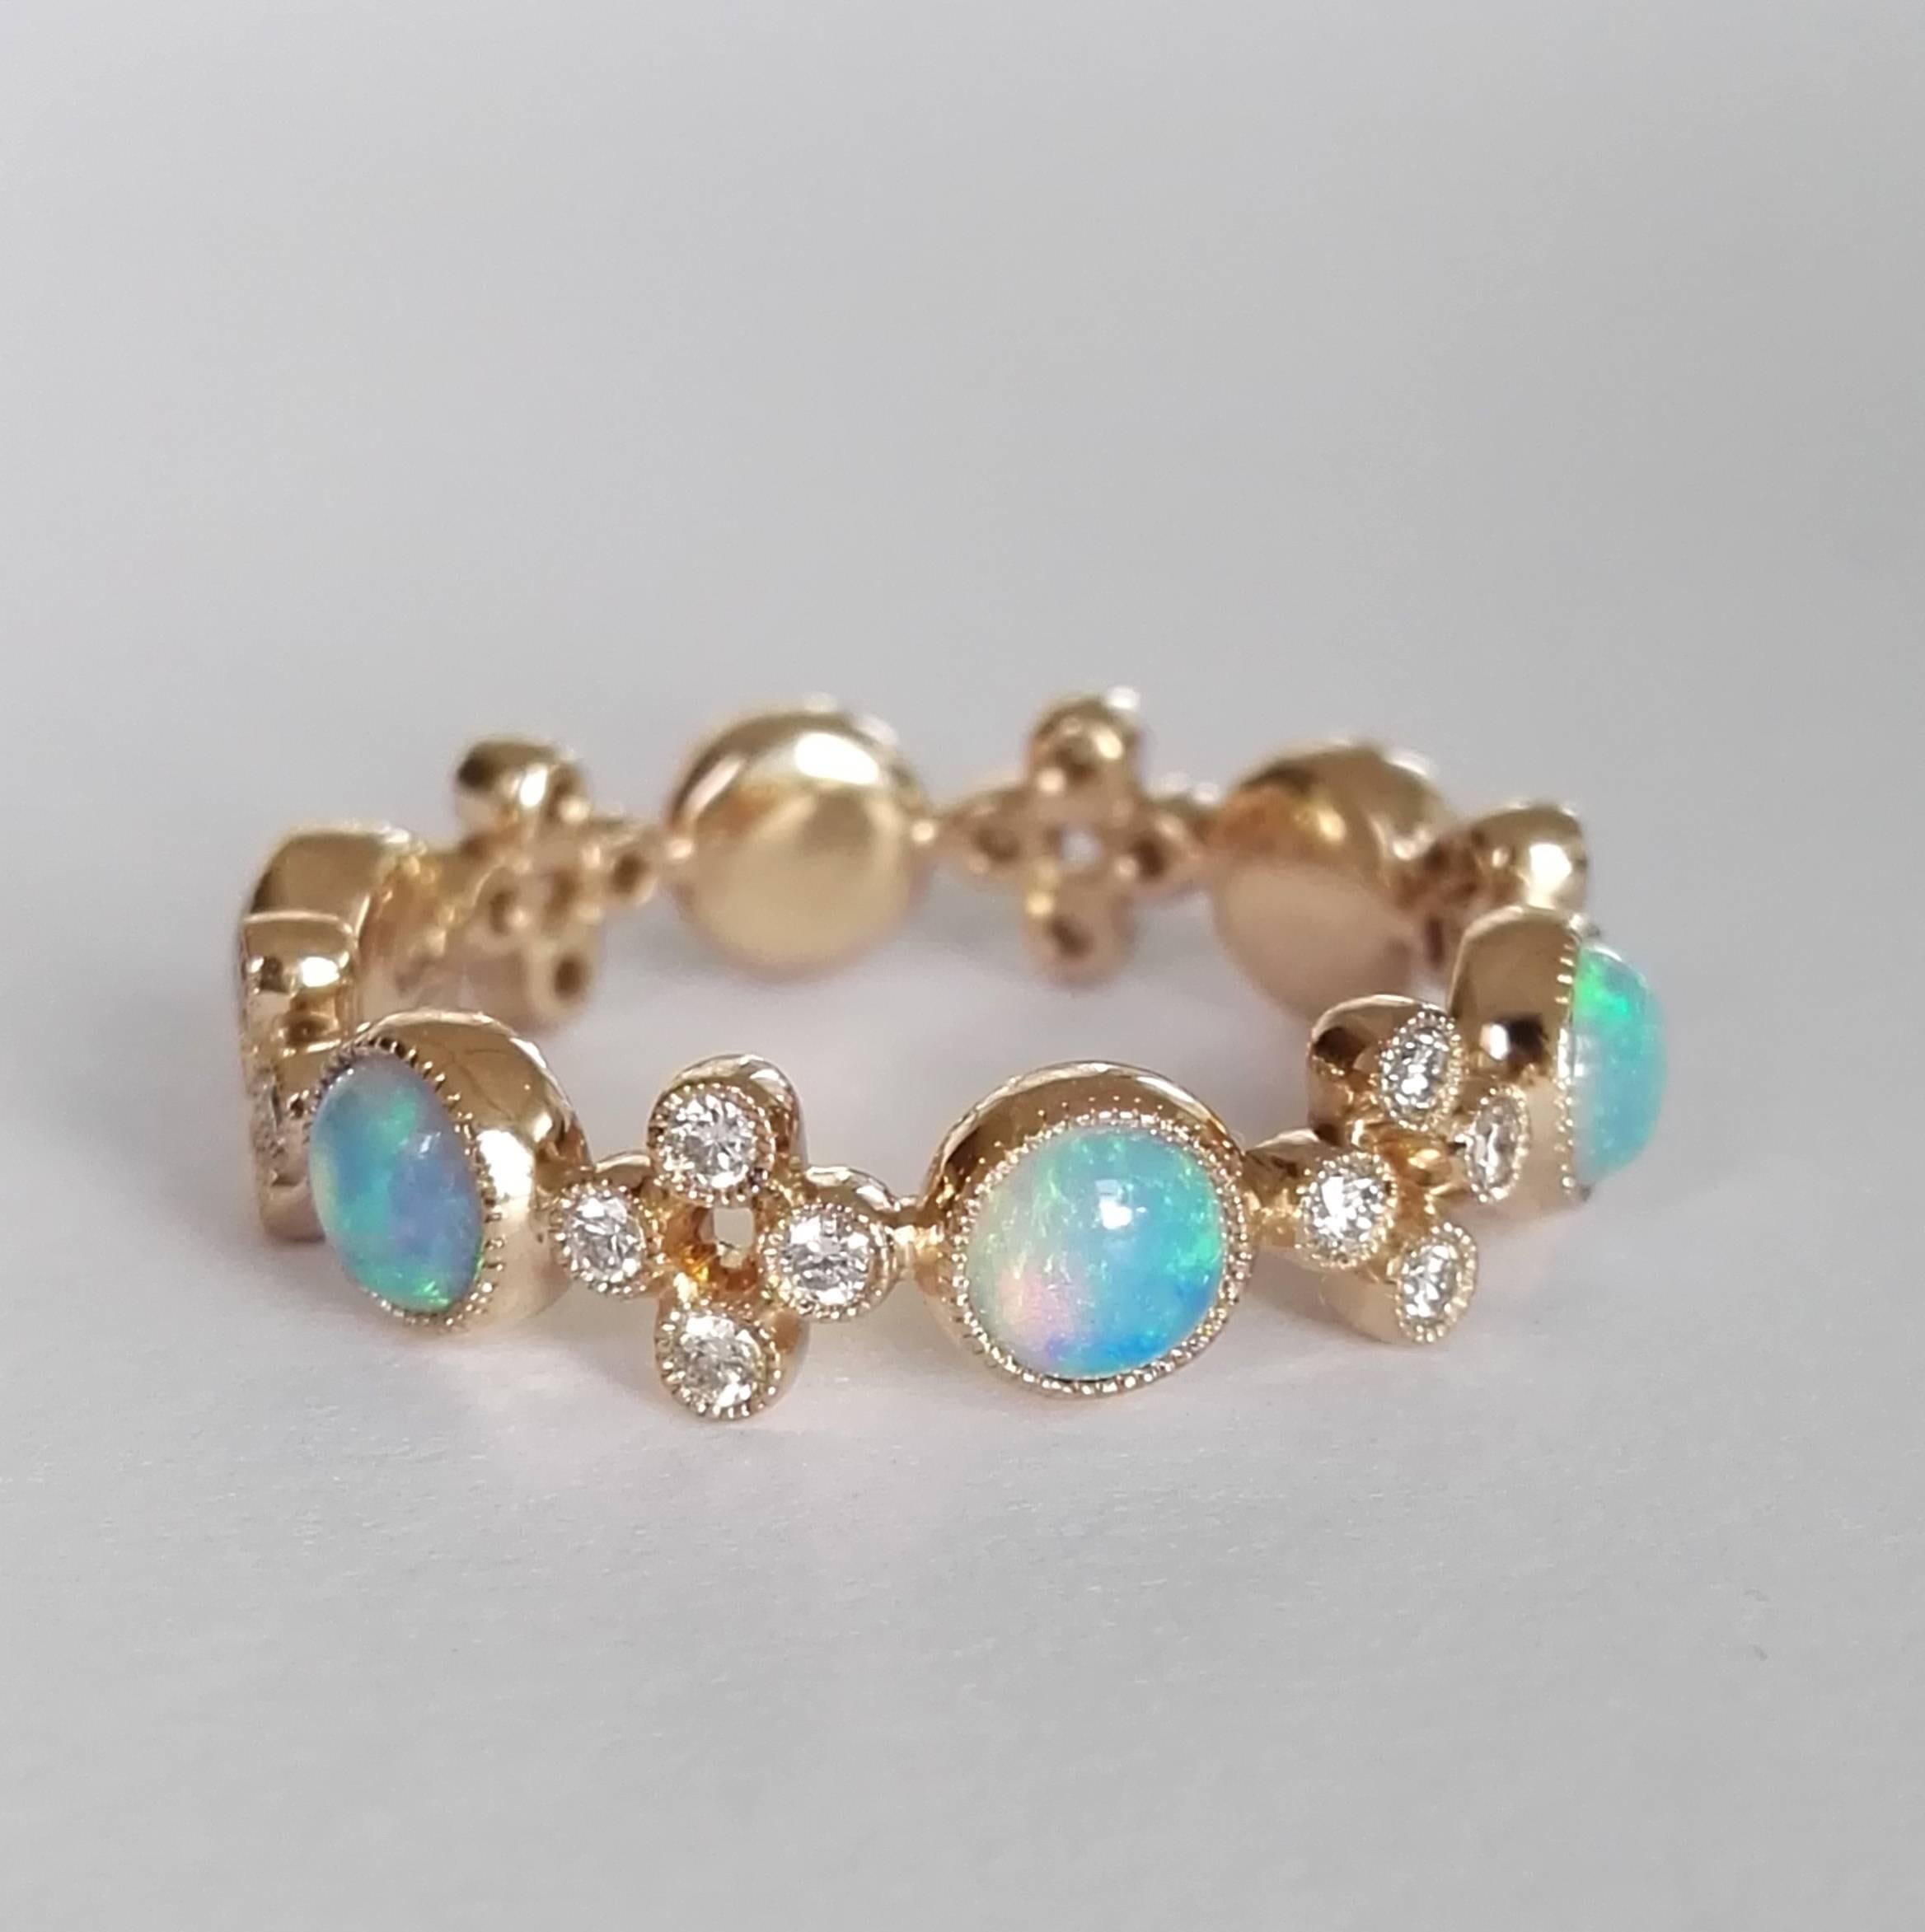 Dalben design Opal band ring with 6 Australian Opals and 24 white round brillant cut Diamonds weighing 0,24 carats mounted in 18 kt warm white gold. 
Ring size 6 1/2 USA - 53 EU .  
The Ring has been designed and handcrafted in our atelier in Como